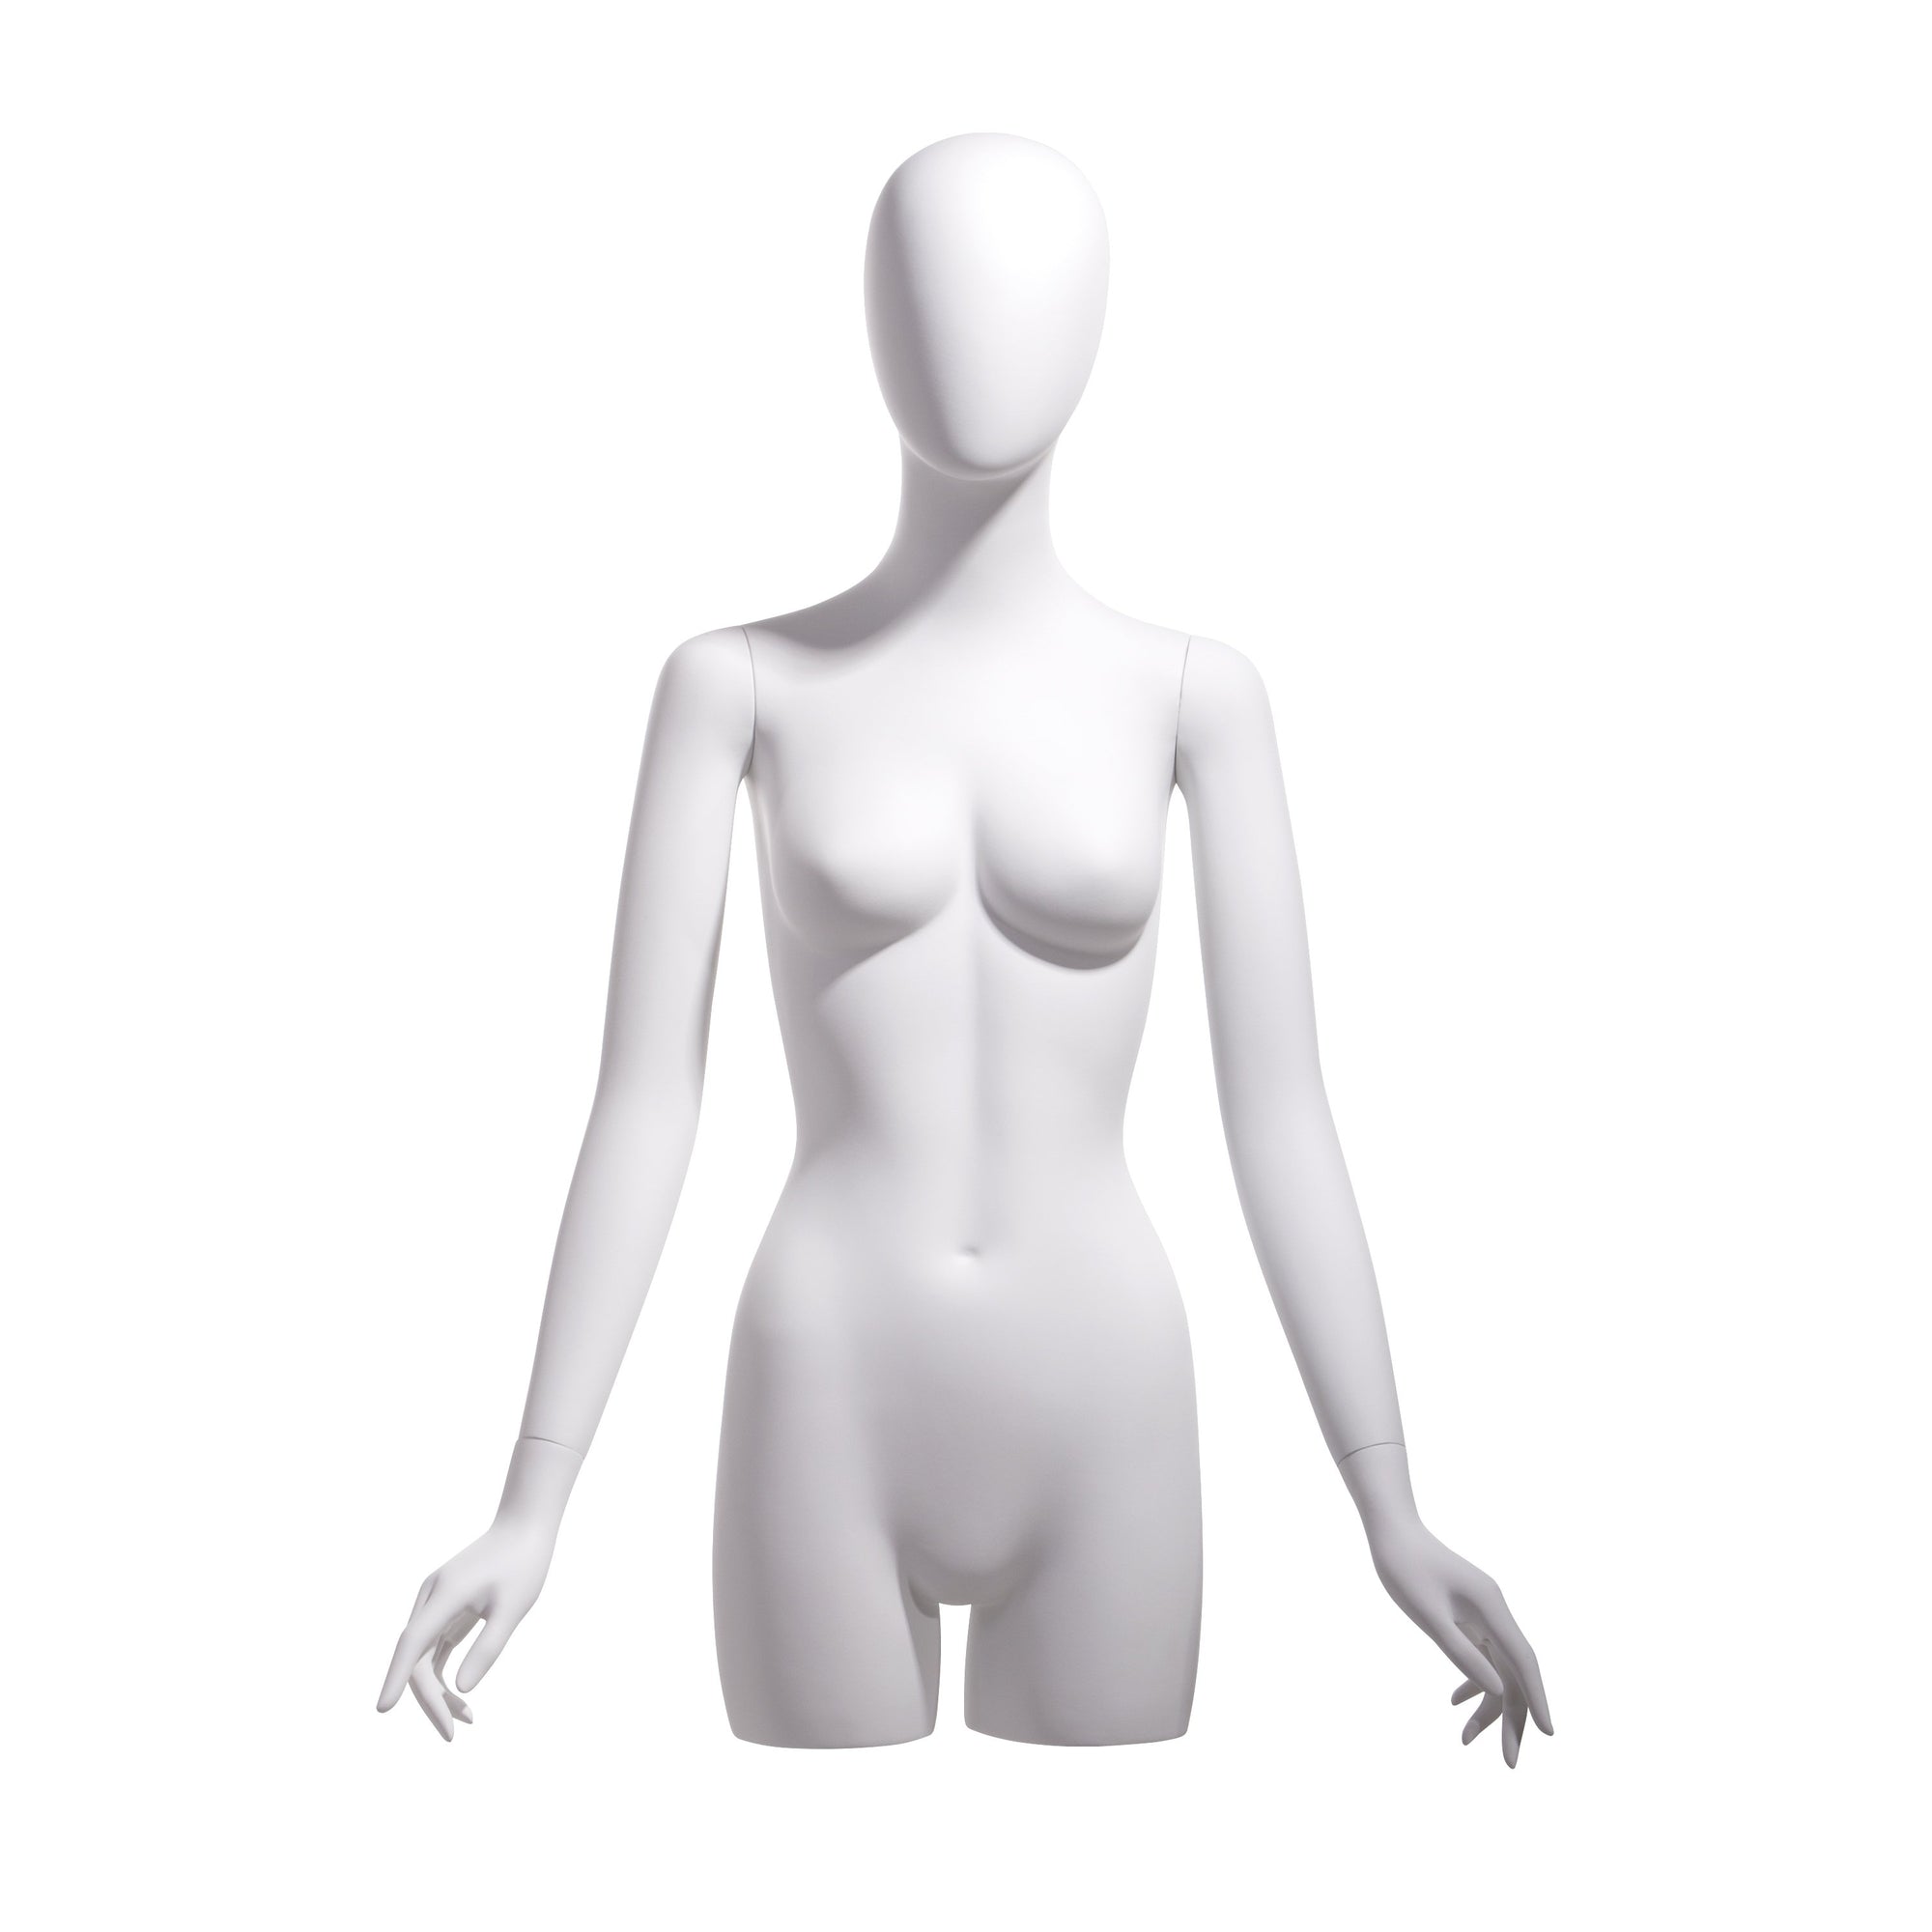 Female 3/4 form, oval head, arms at side - Las Vegas Mannequins